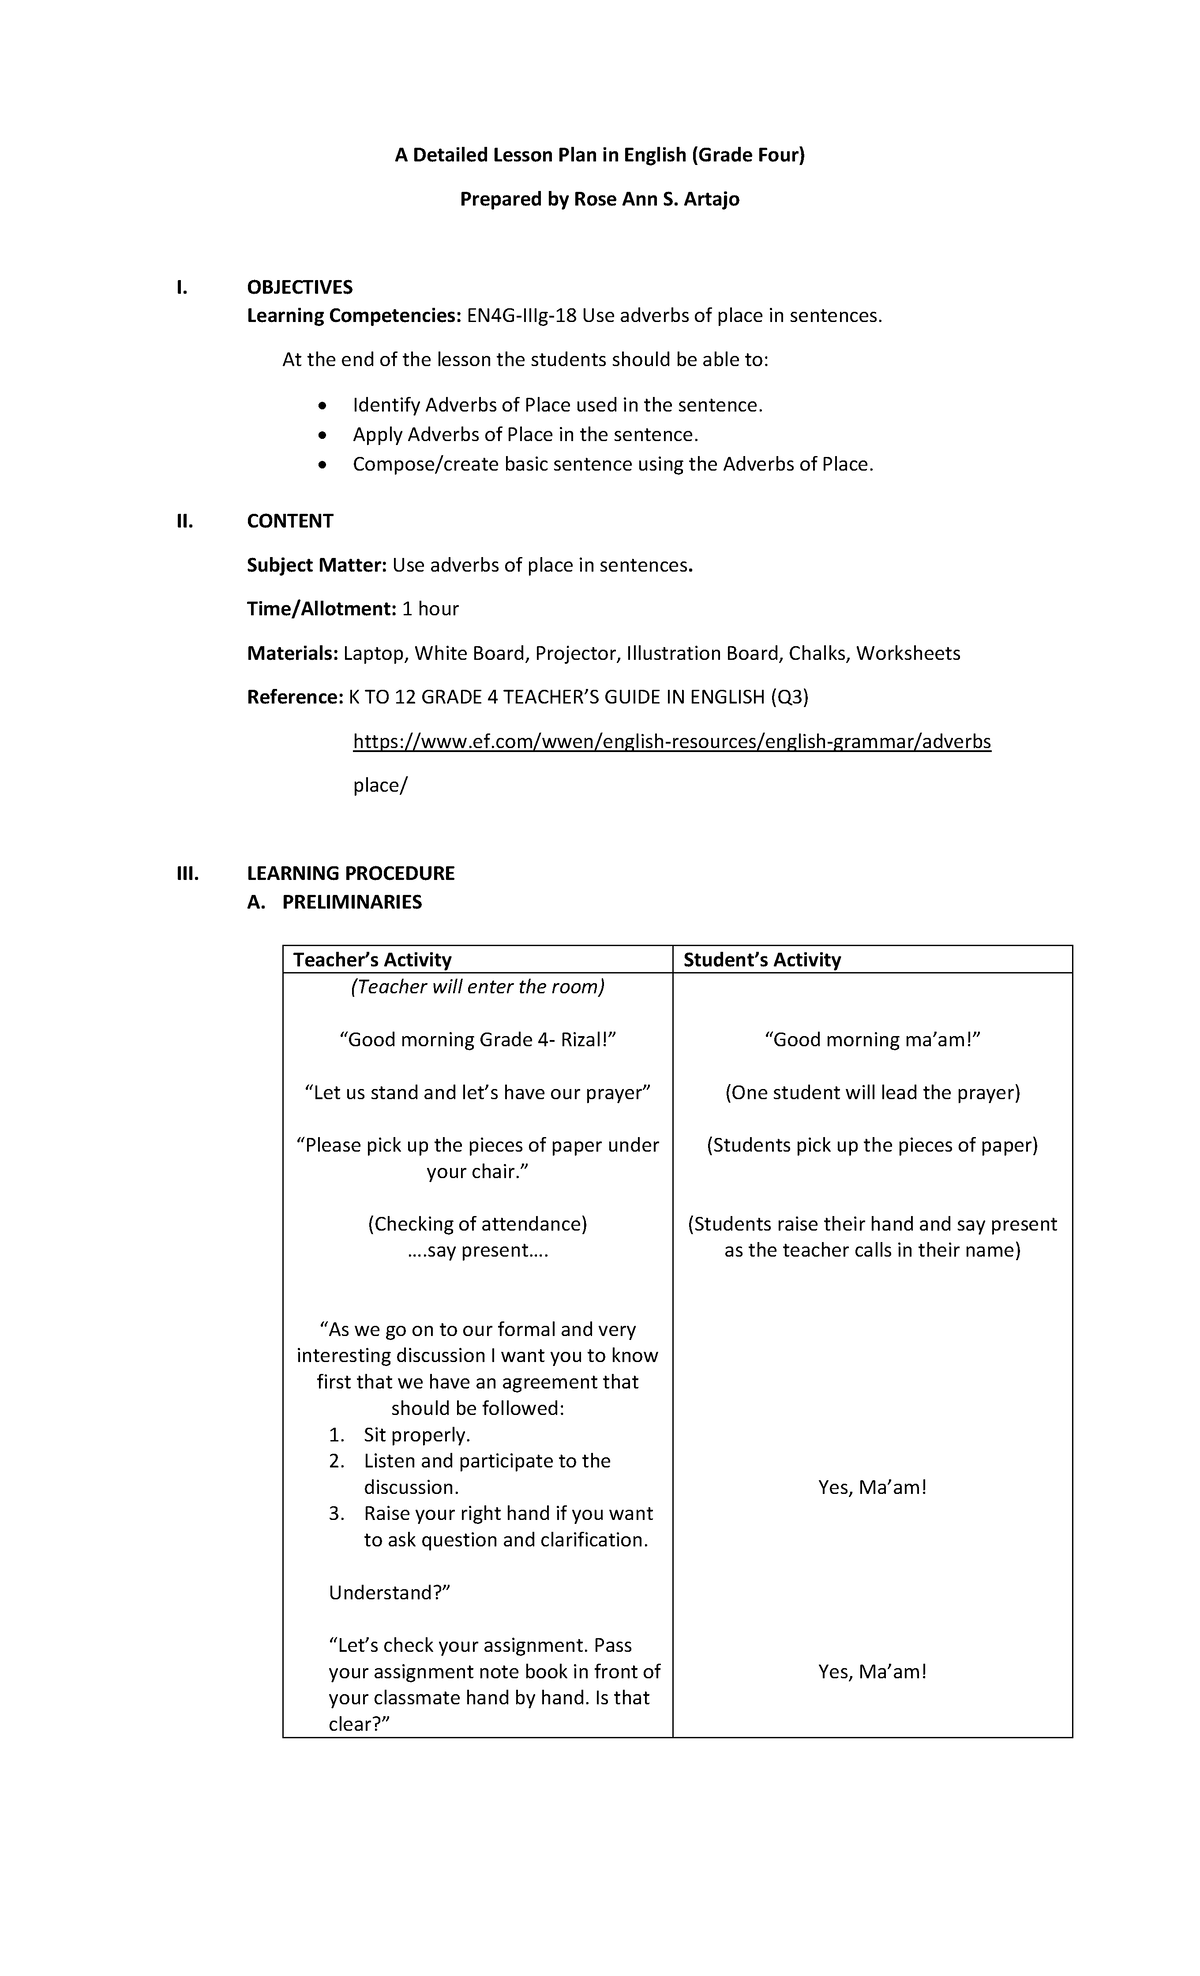 Detailed Lesson PLAN FOR Elementary A Detailed Lesson Plan In English Grade Four Prepared By 